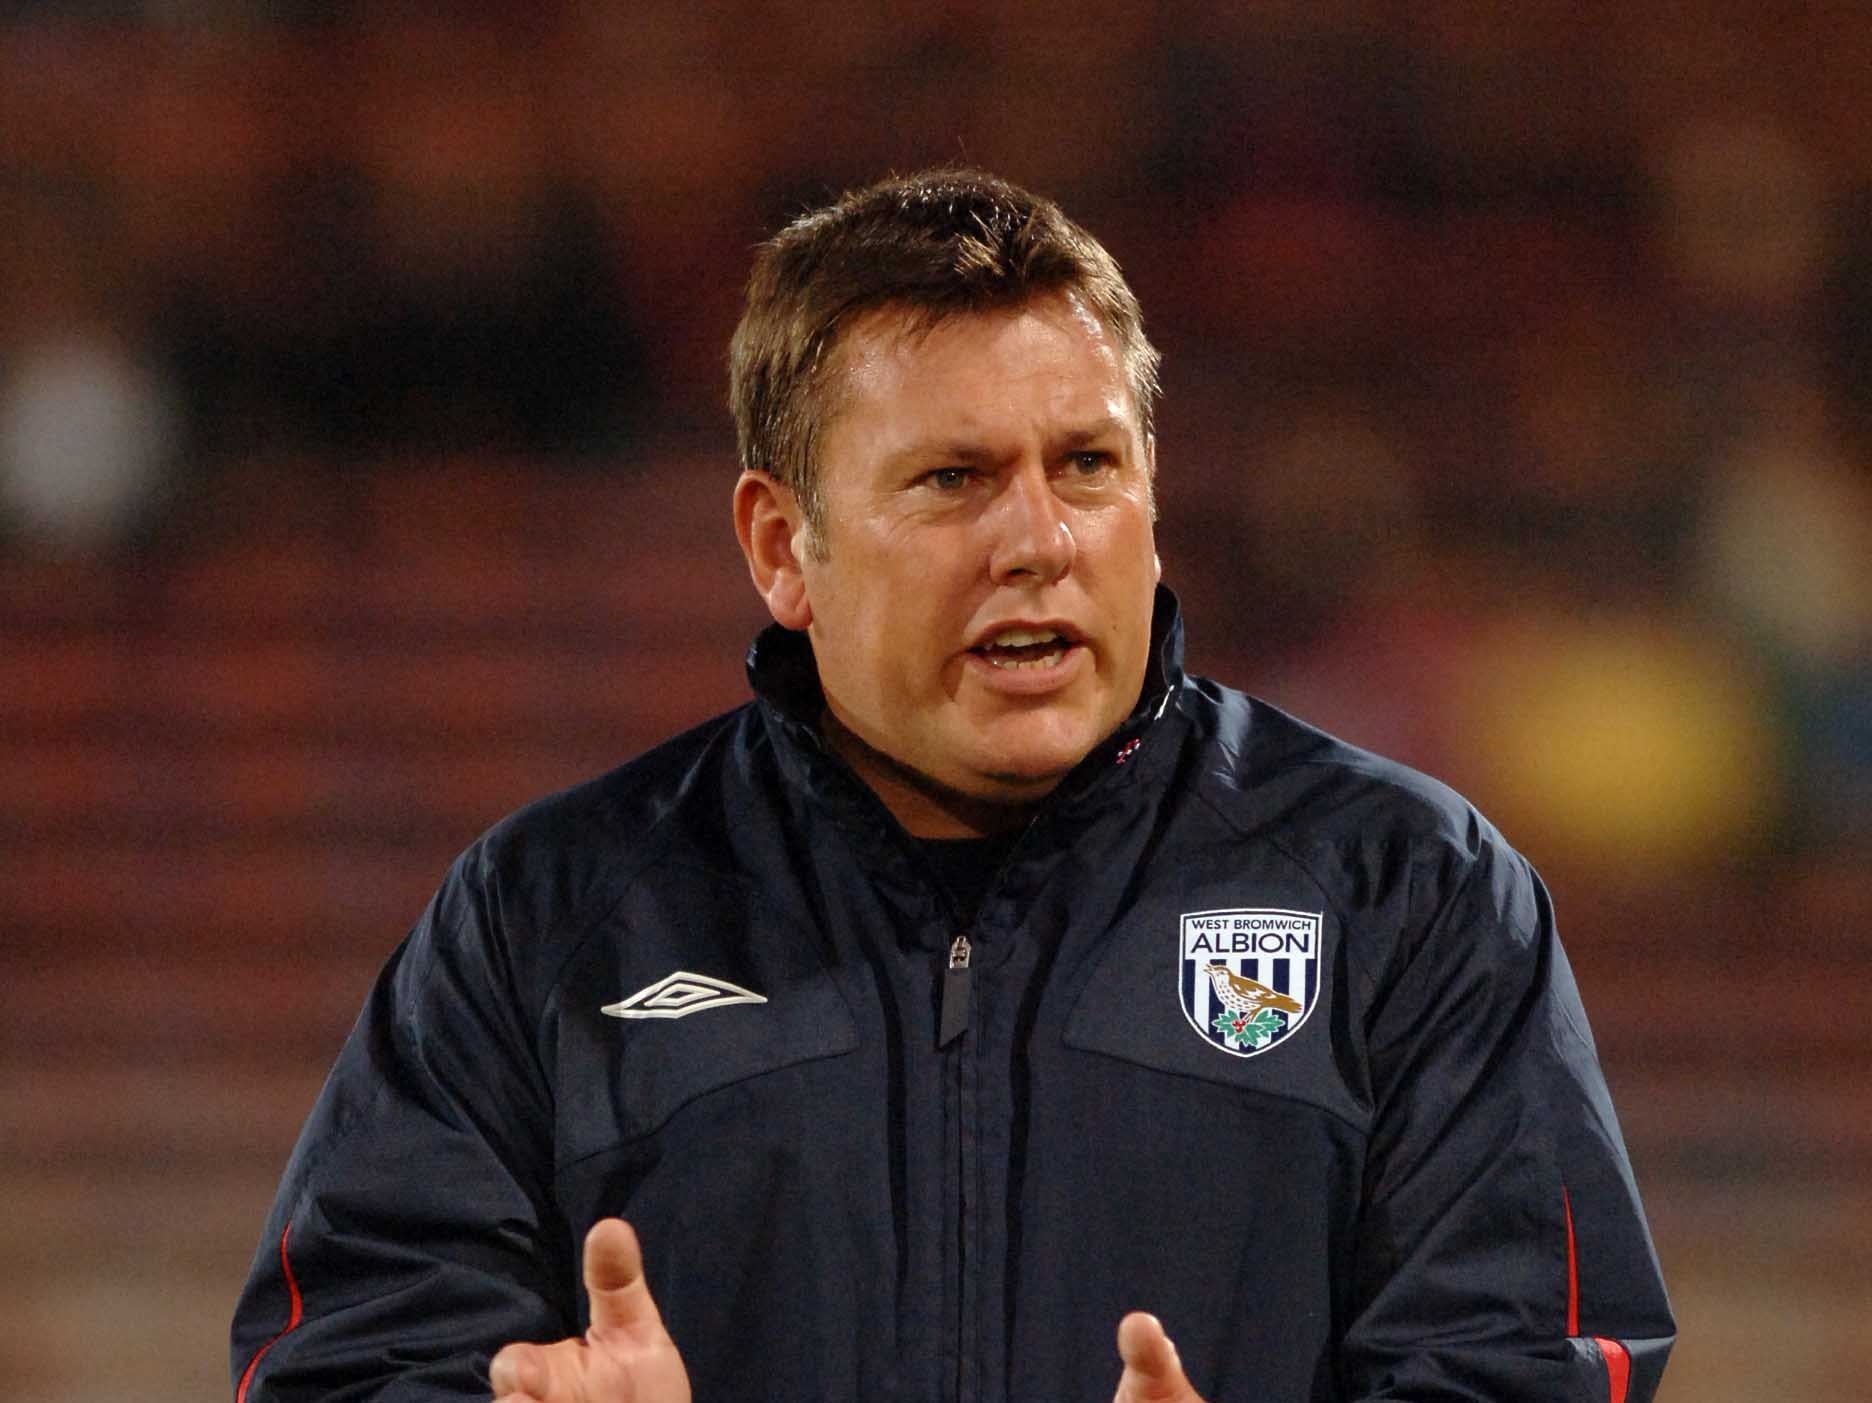 'One of the best': Tributes paid to former West Brom and Walsall midfielder Craig Shakespeare